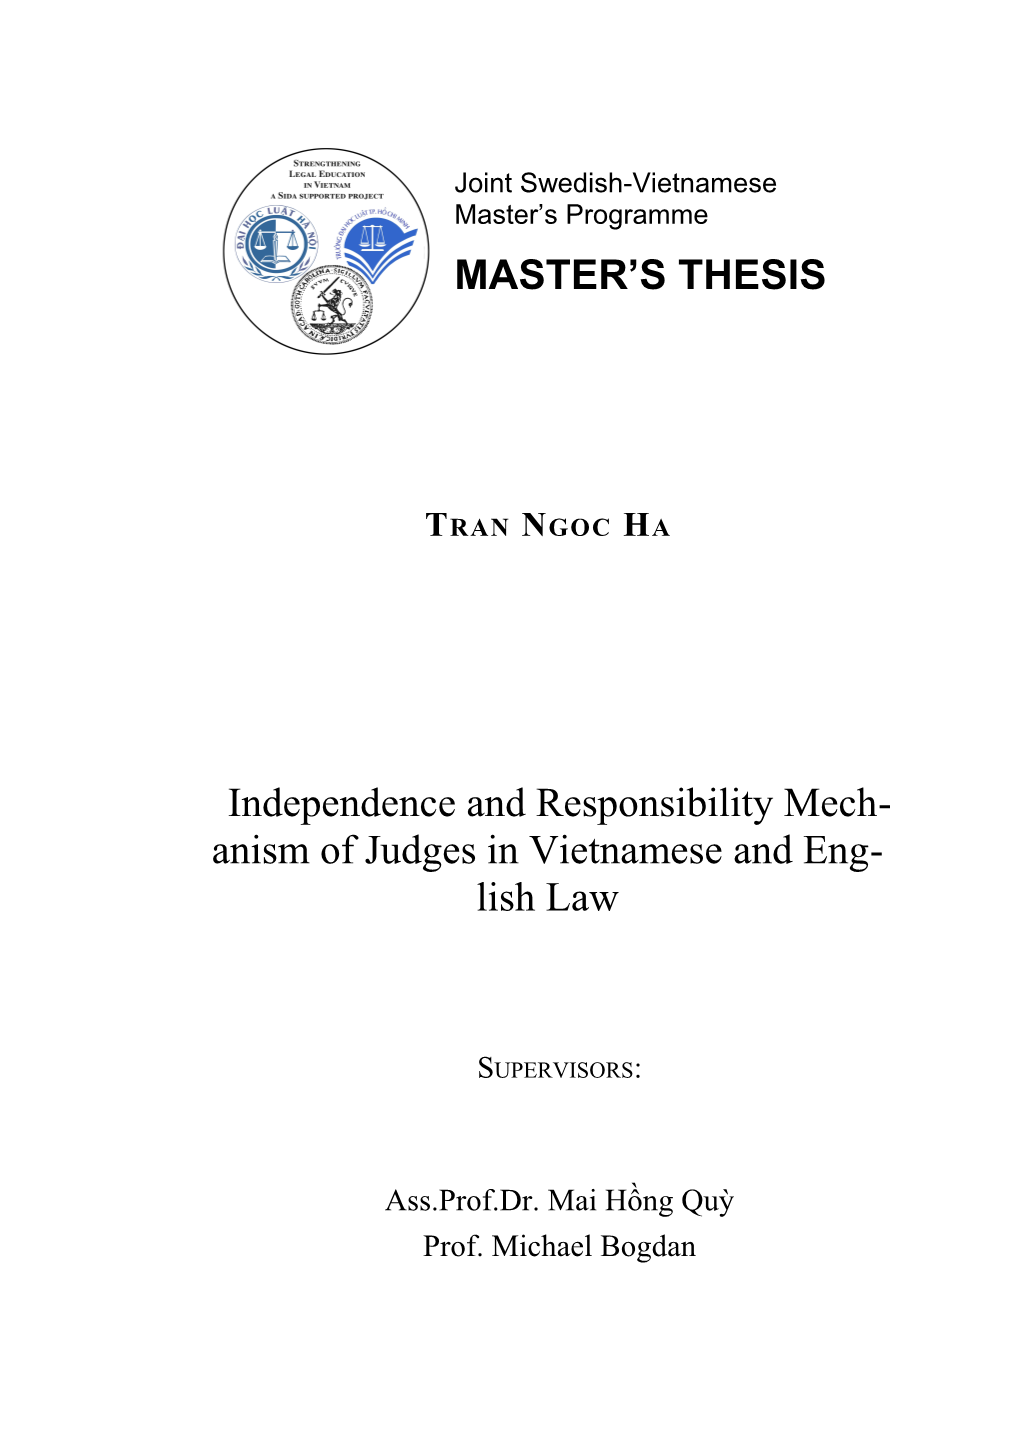 Independence and Responsibility Mechanism of Judges in Vietnamese and English Law